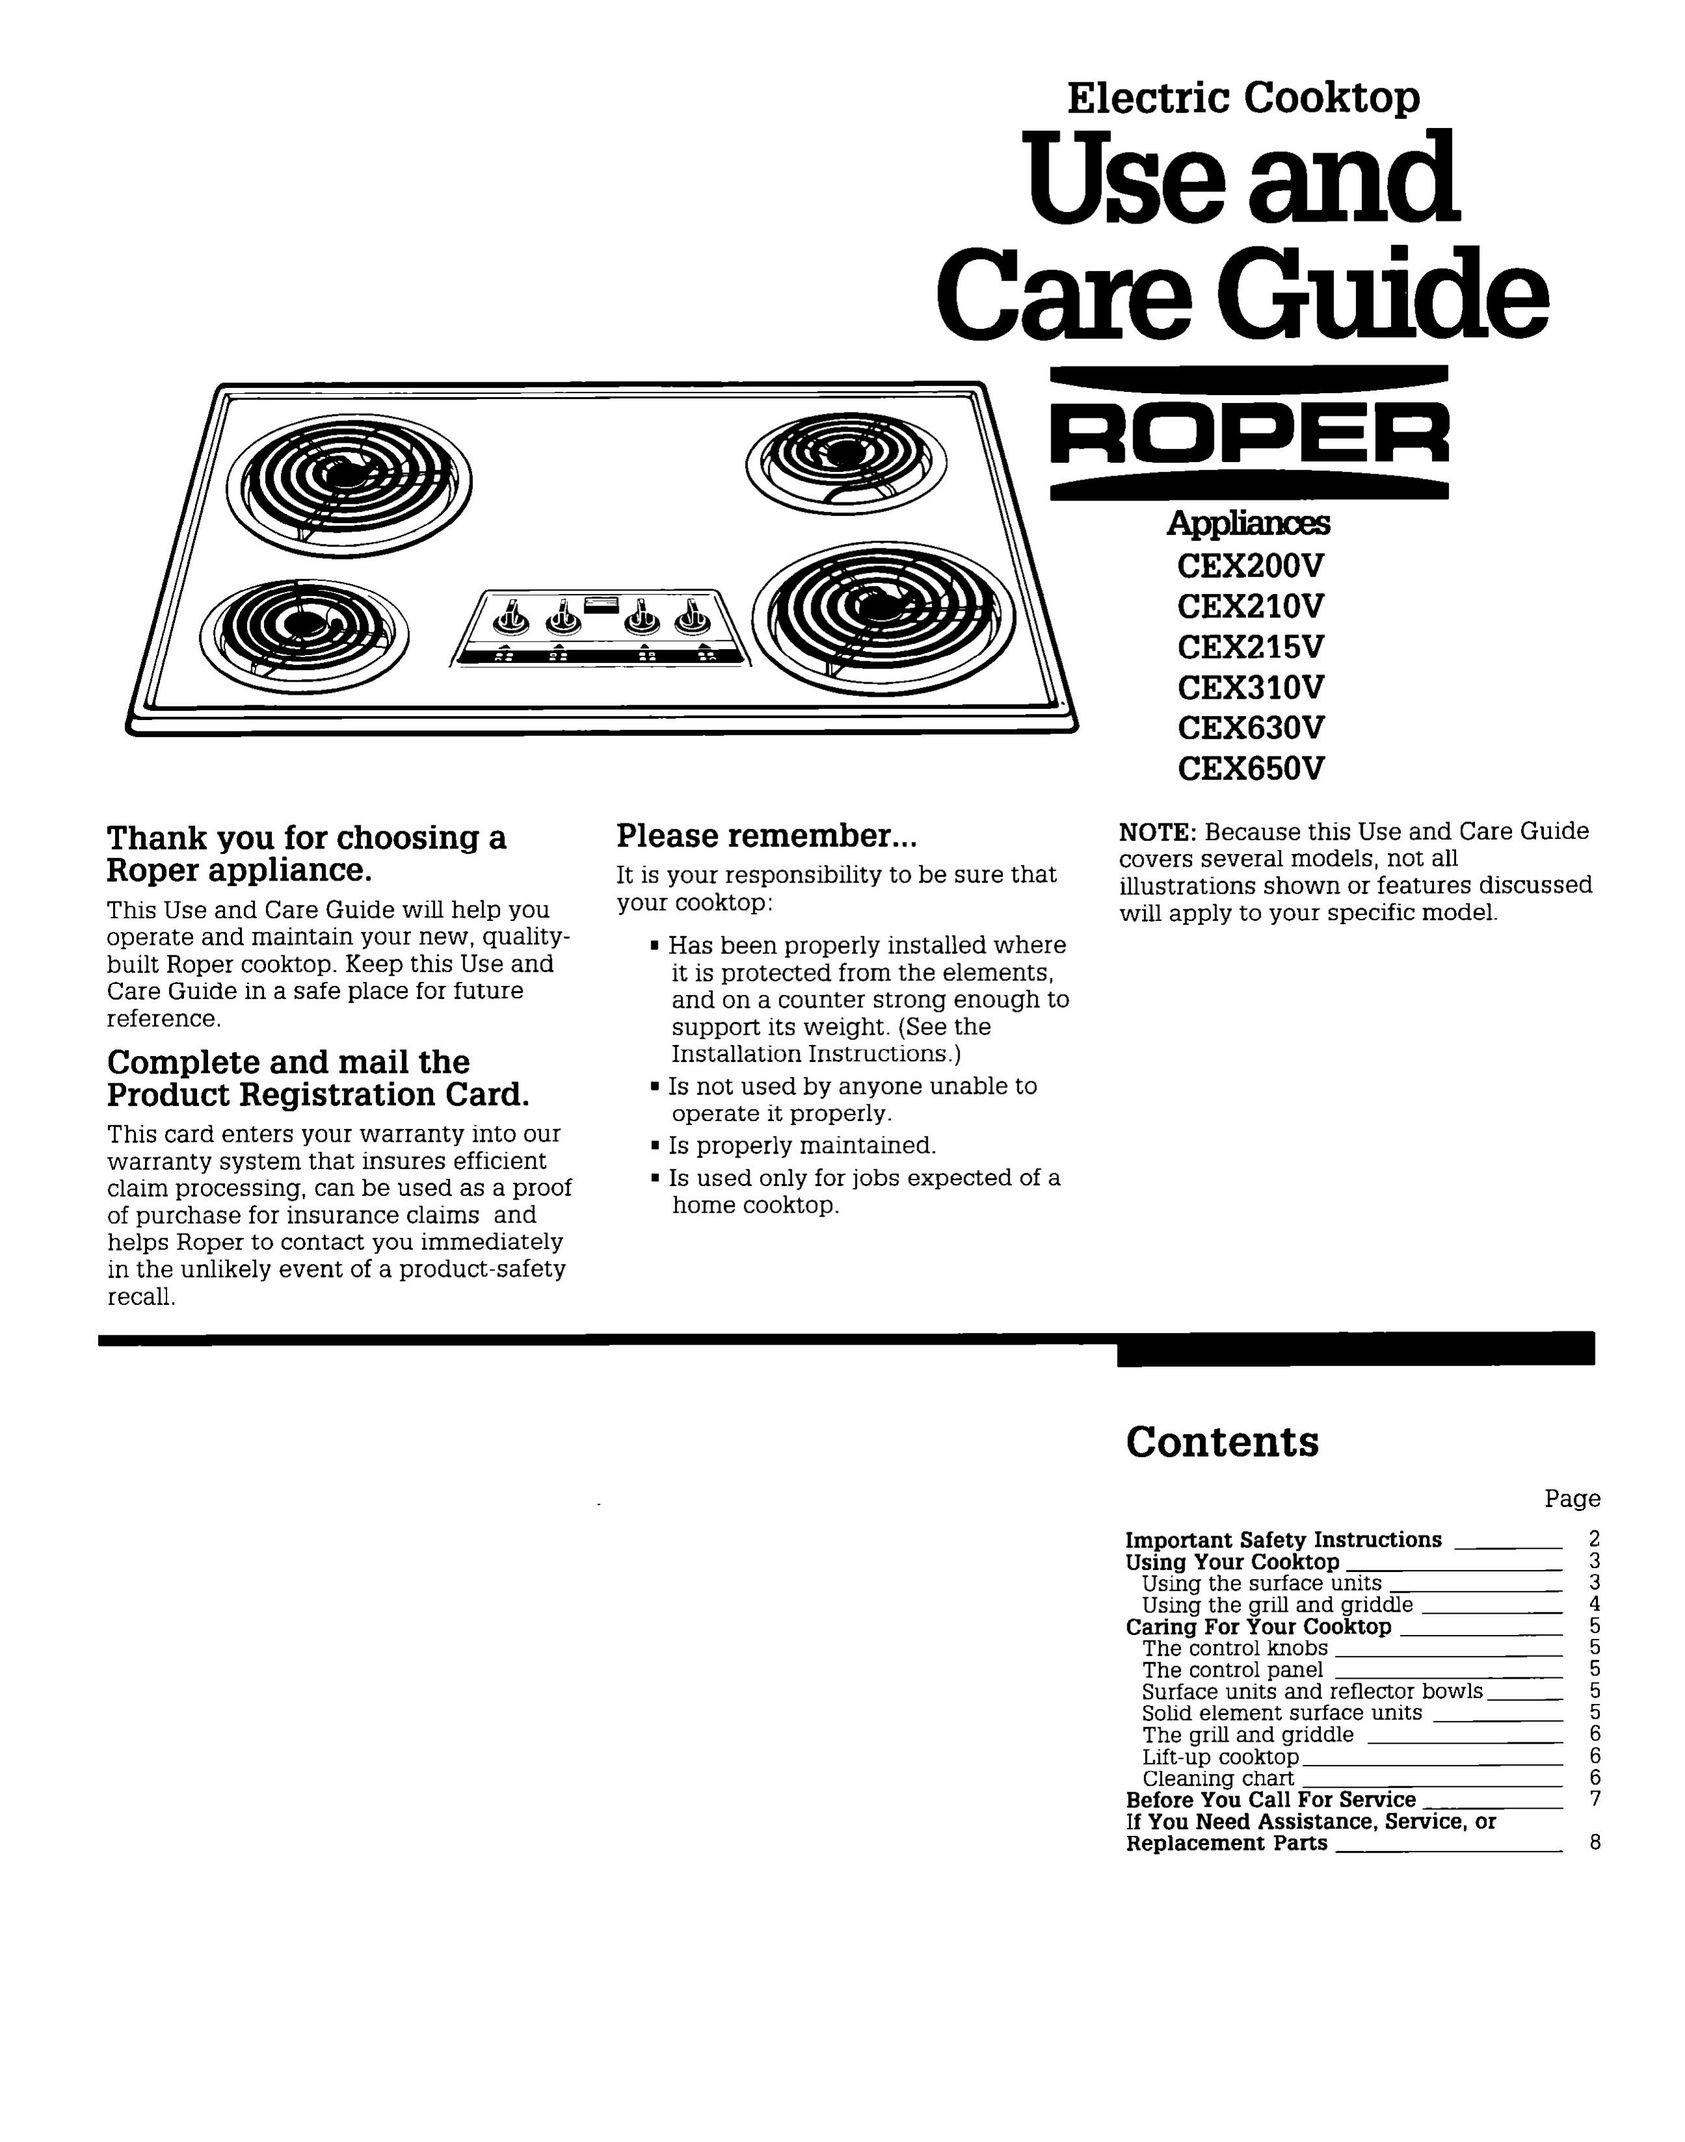 Whirlpool CEX650V Cooktop User Manual